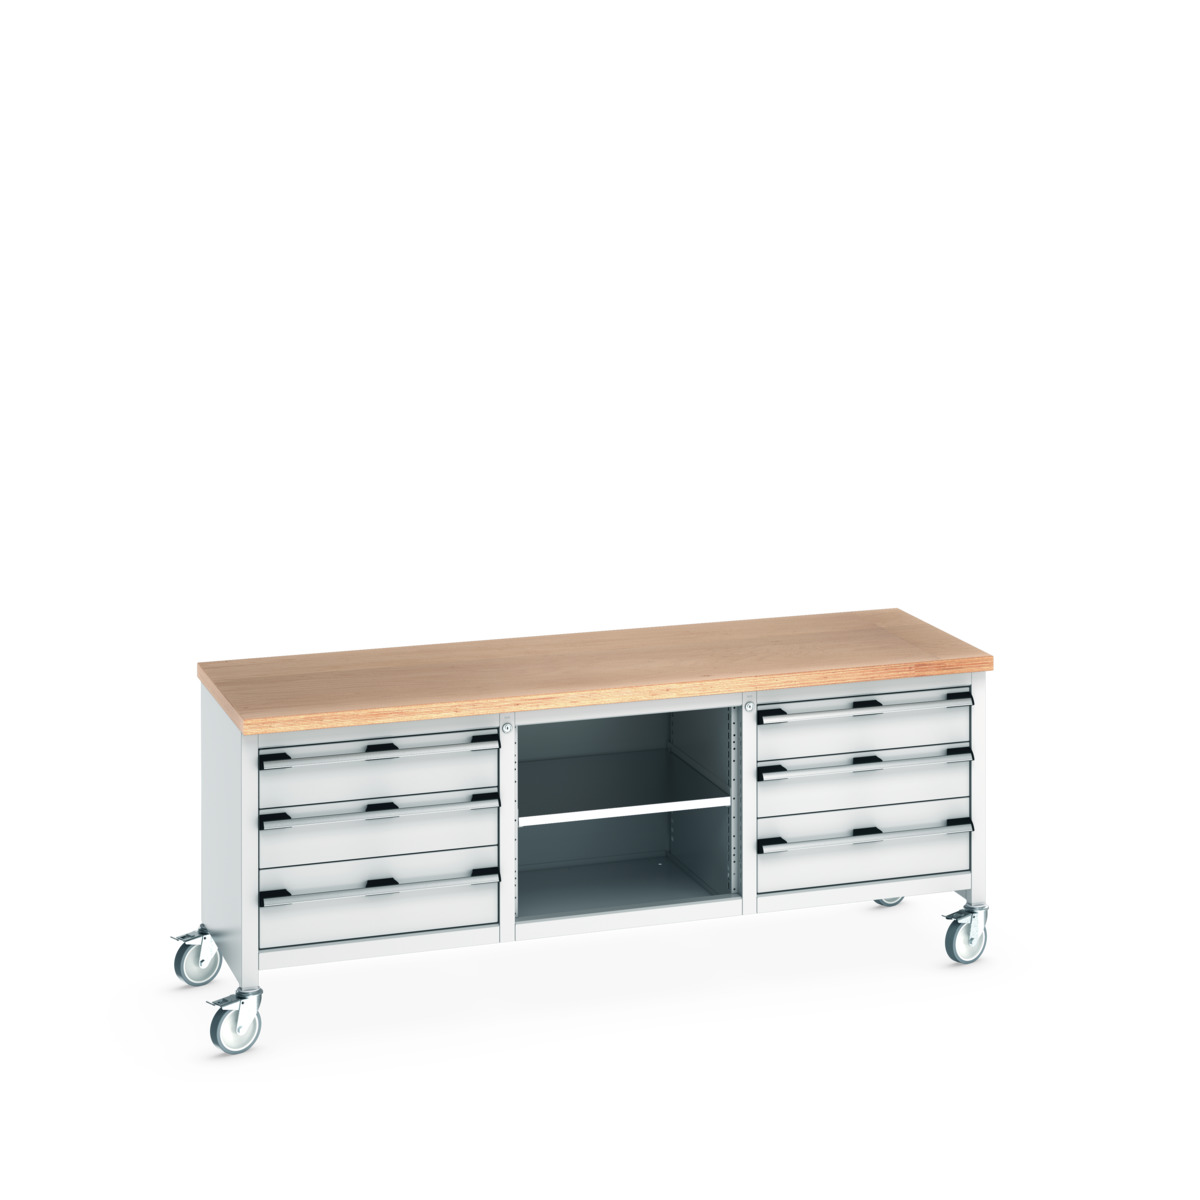 41002130.16V - cubio mobile storage bench (mpx)